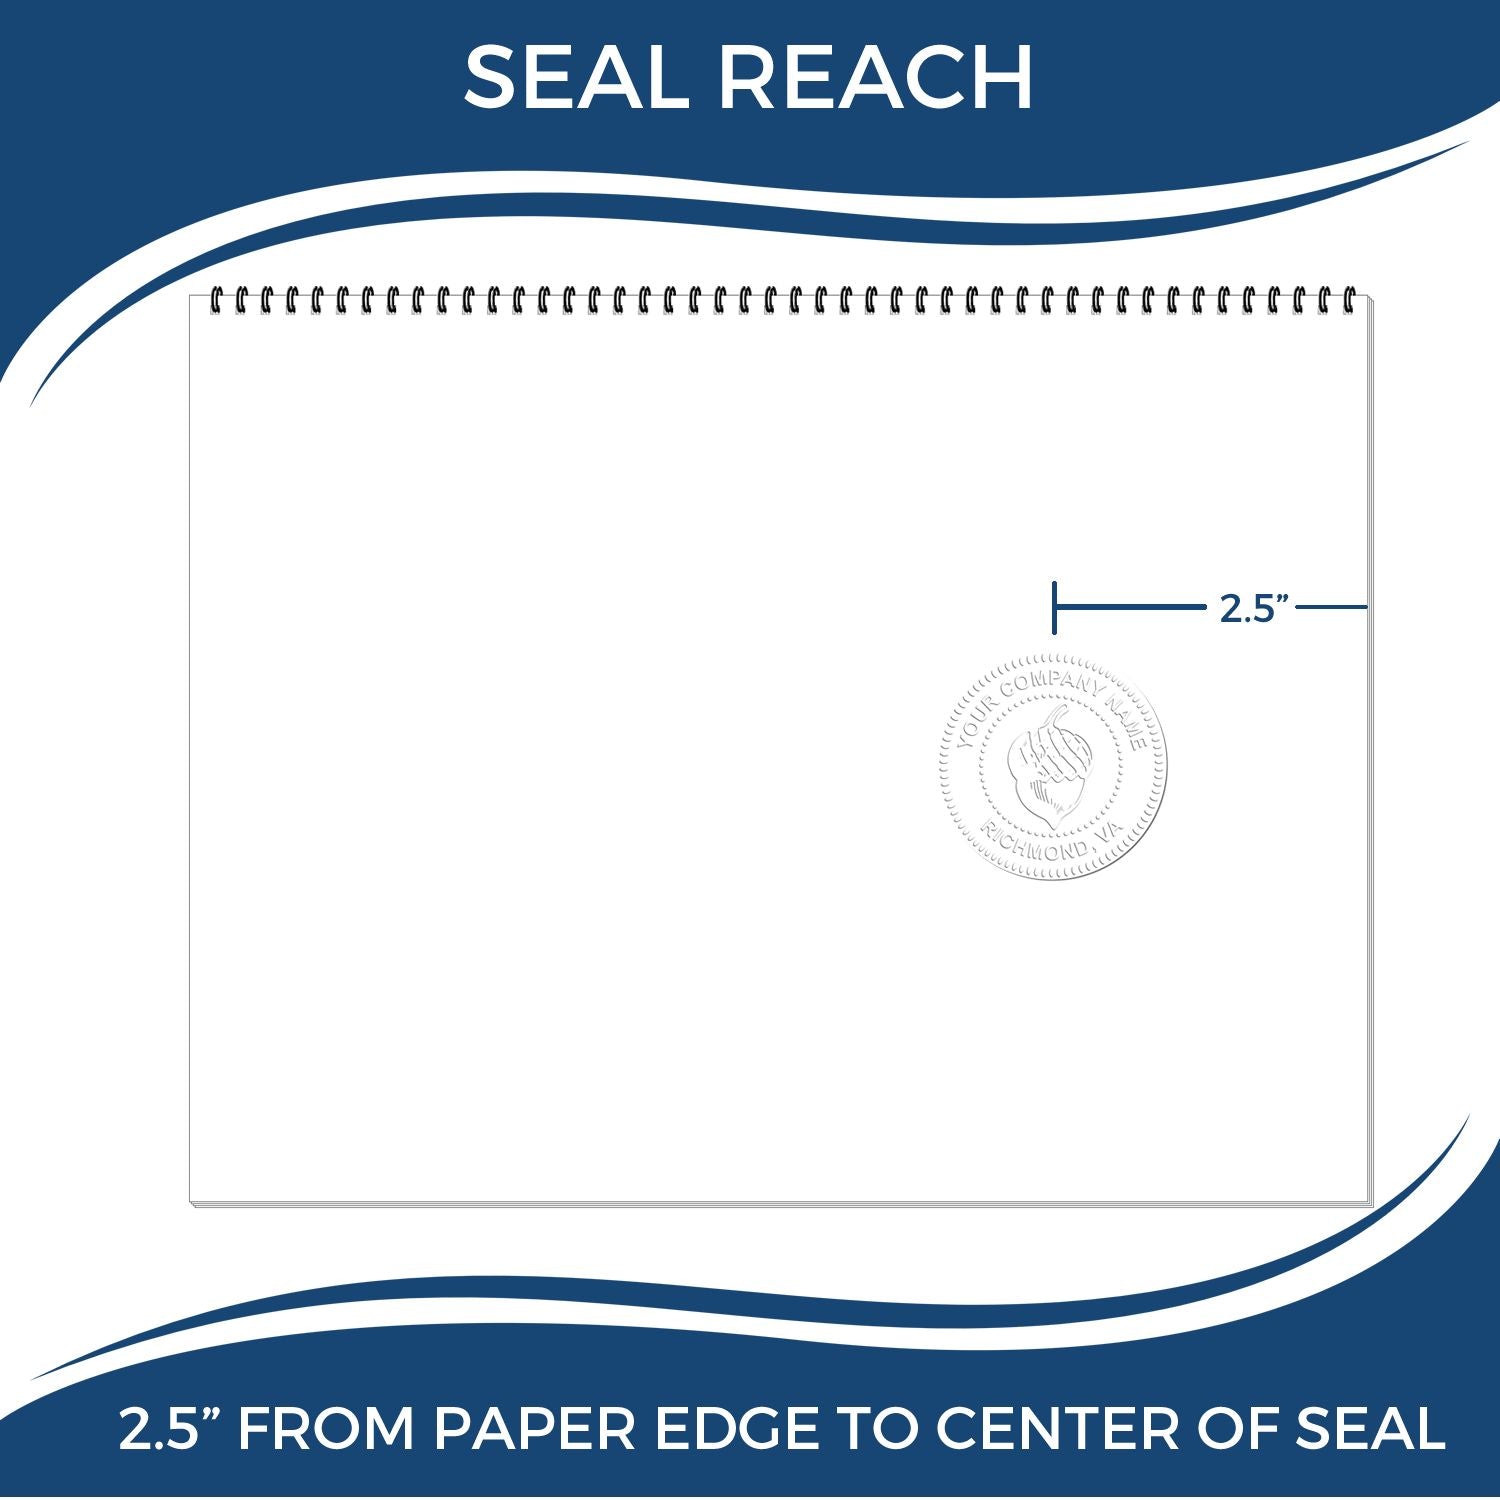 An infographic showing the seal reach which is represented by a ruler and a miniature seal image of the Heavy Duty Cast Iron Virginia Land Surveyor Seal Embosser